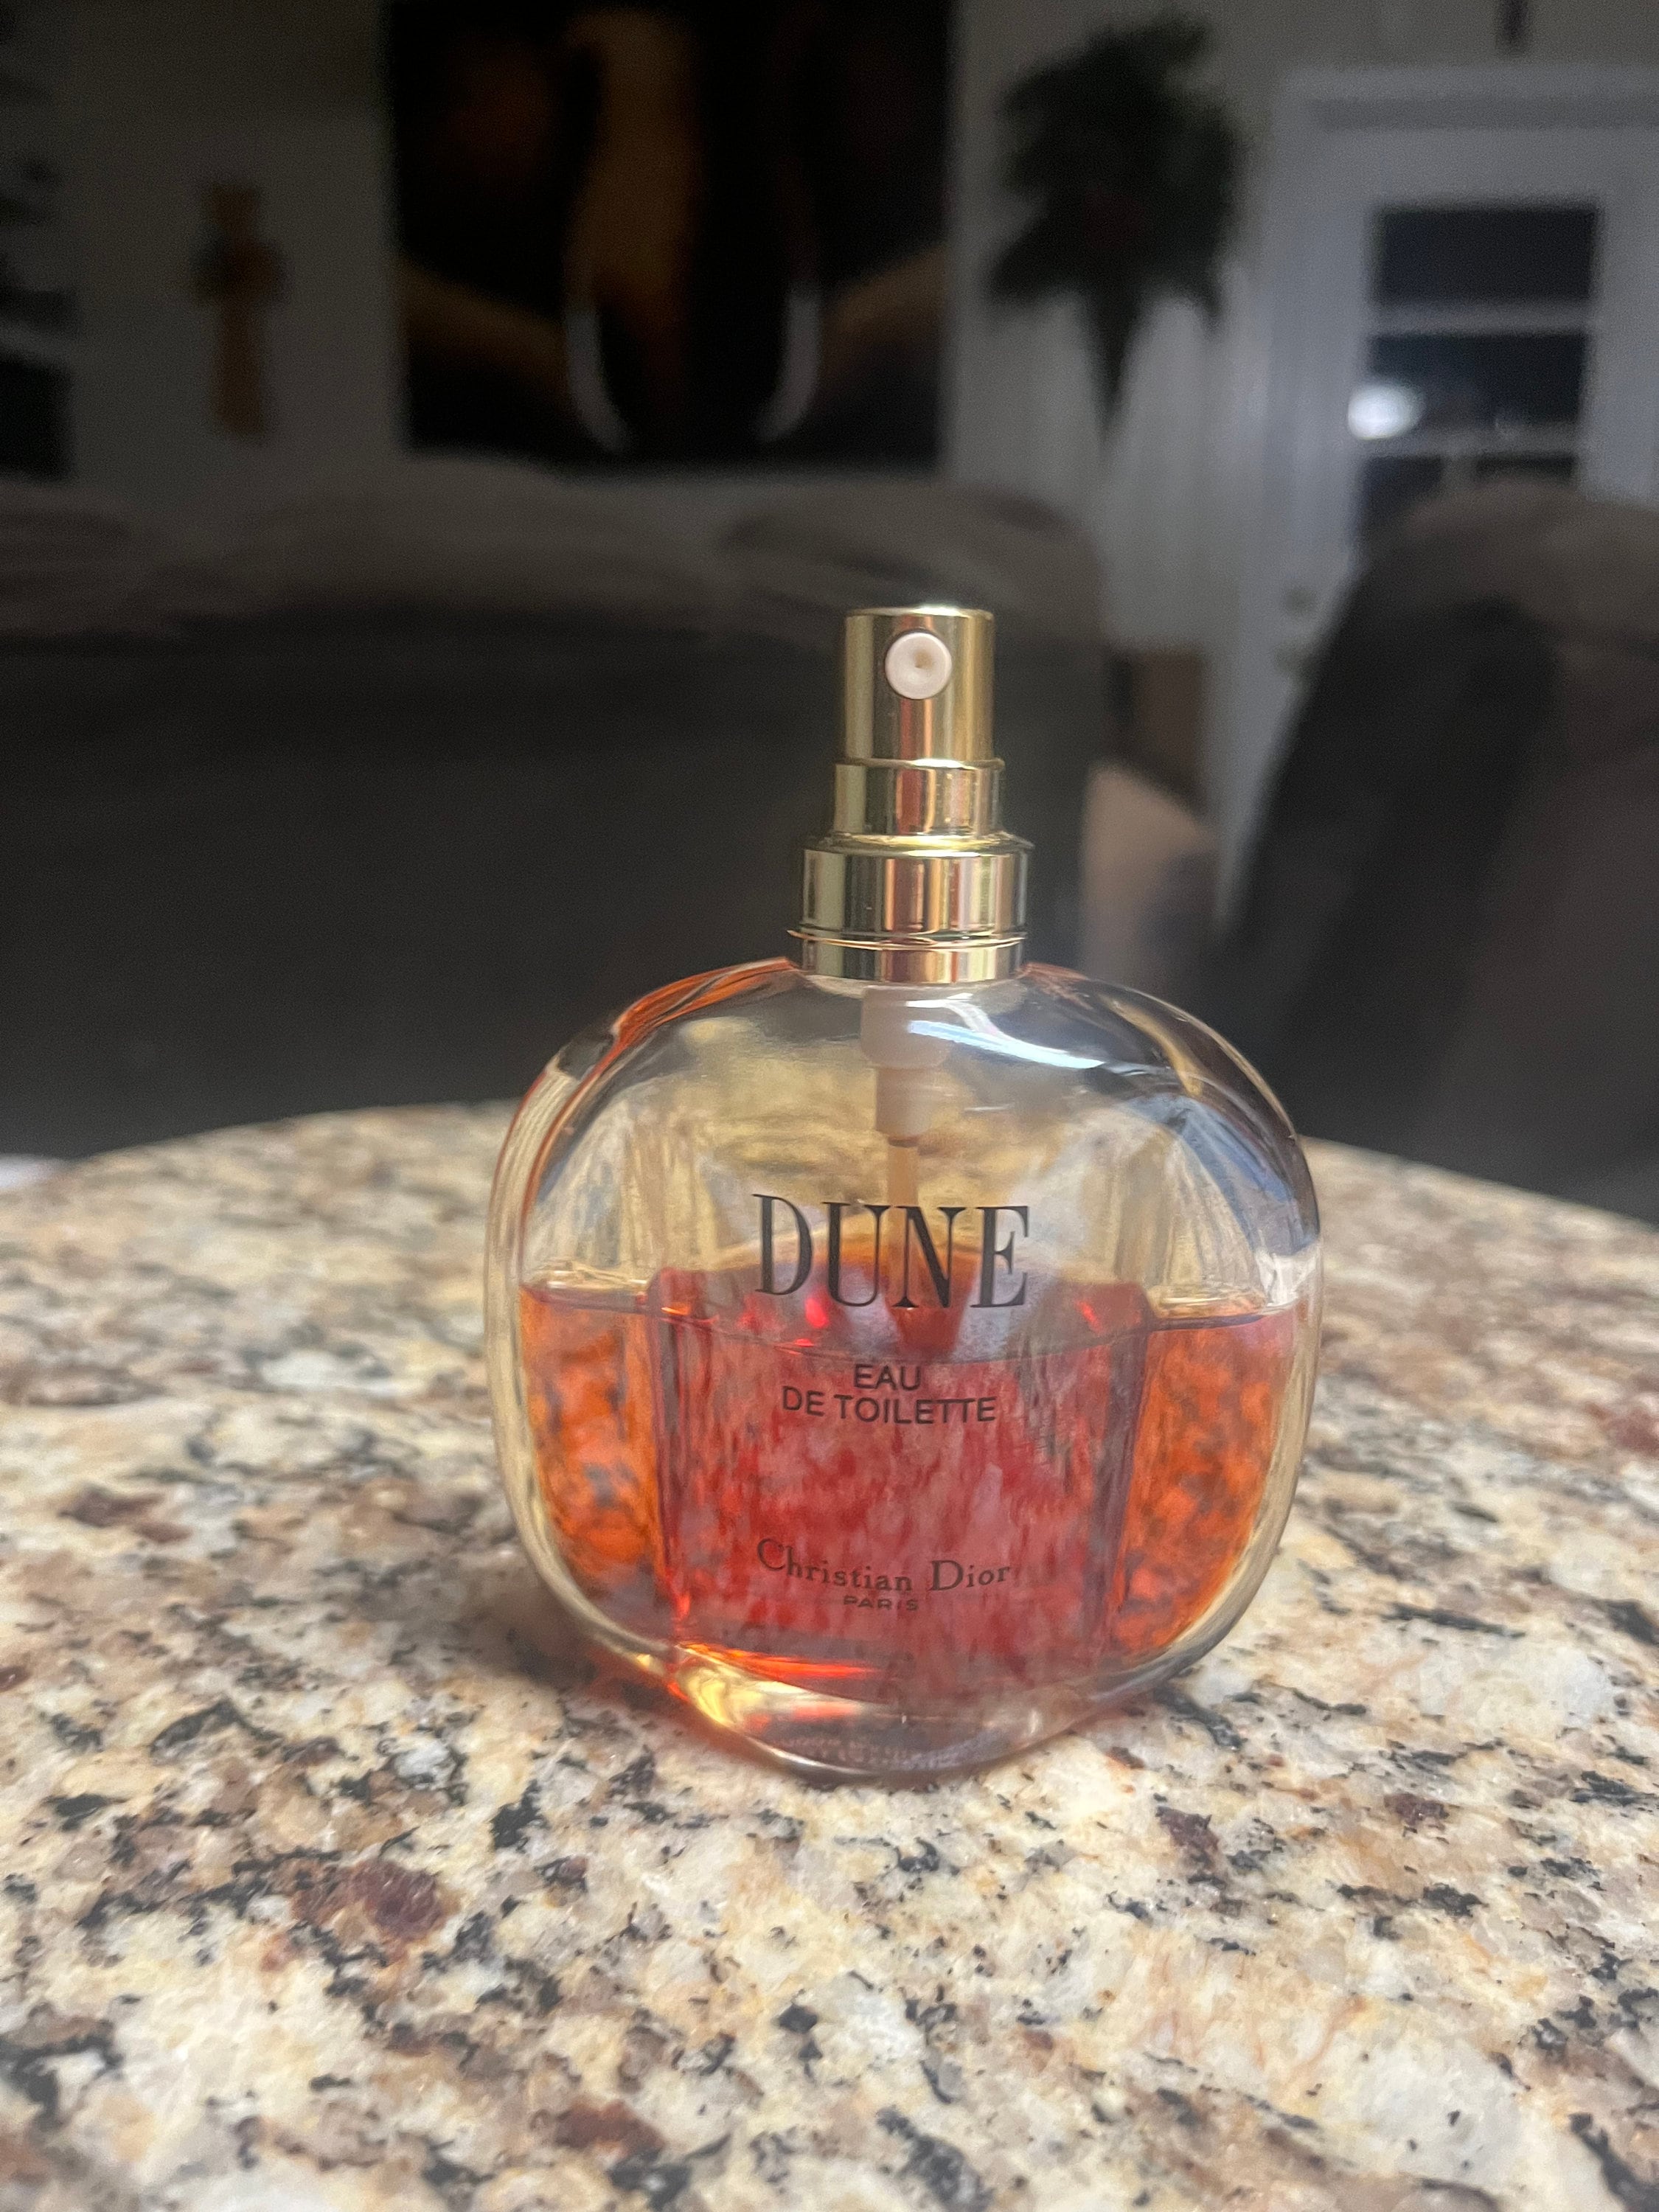 Dune by Christian Dior EDT Perfume1.7 Oz. 80% Full - Etsy Canada